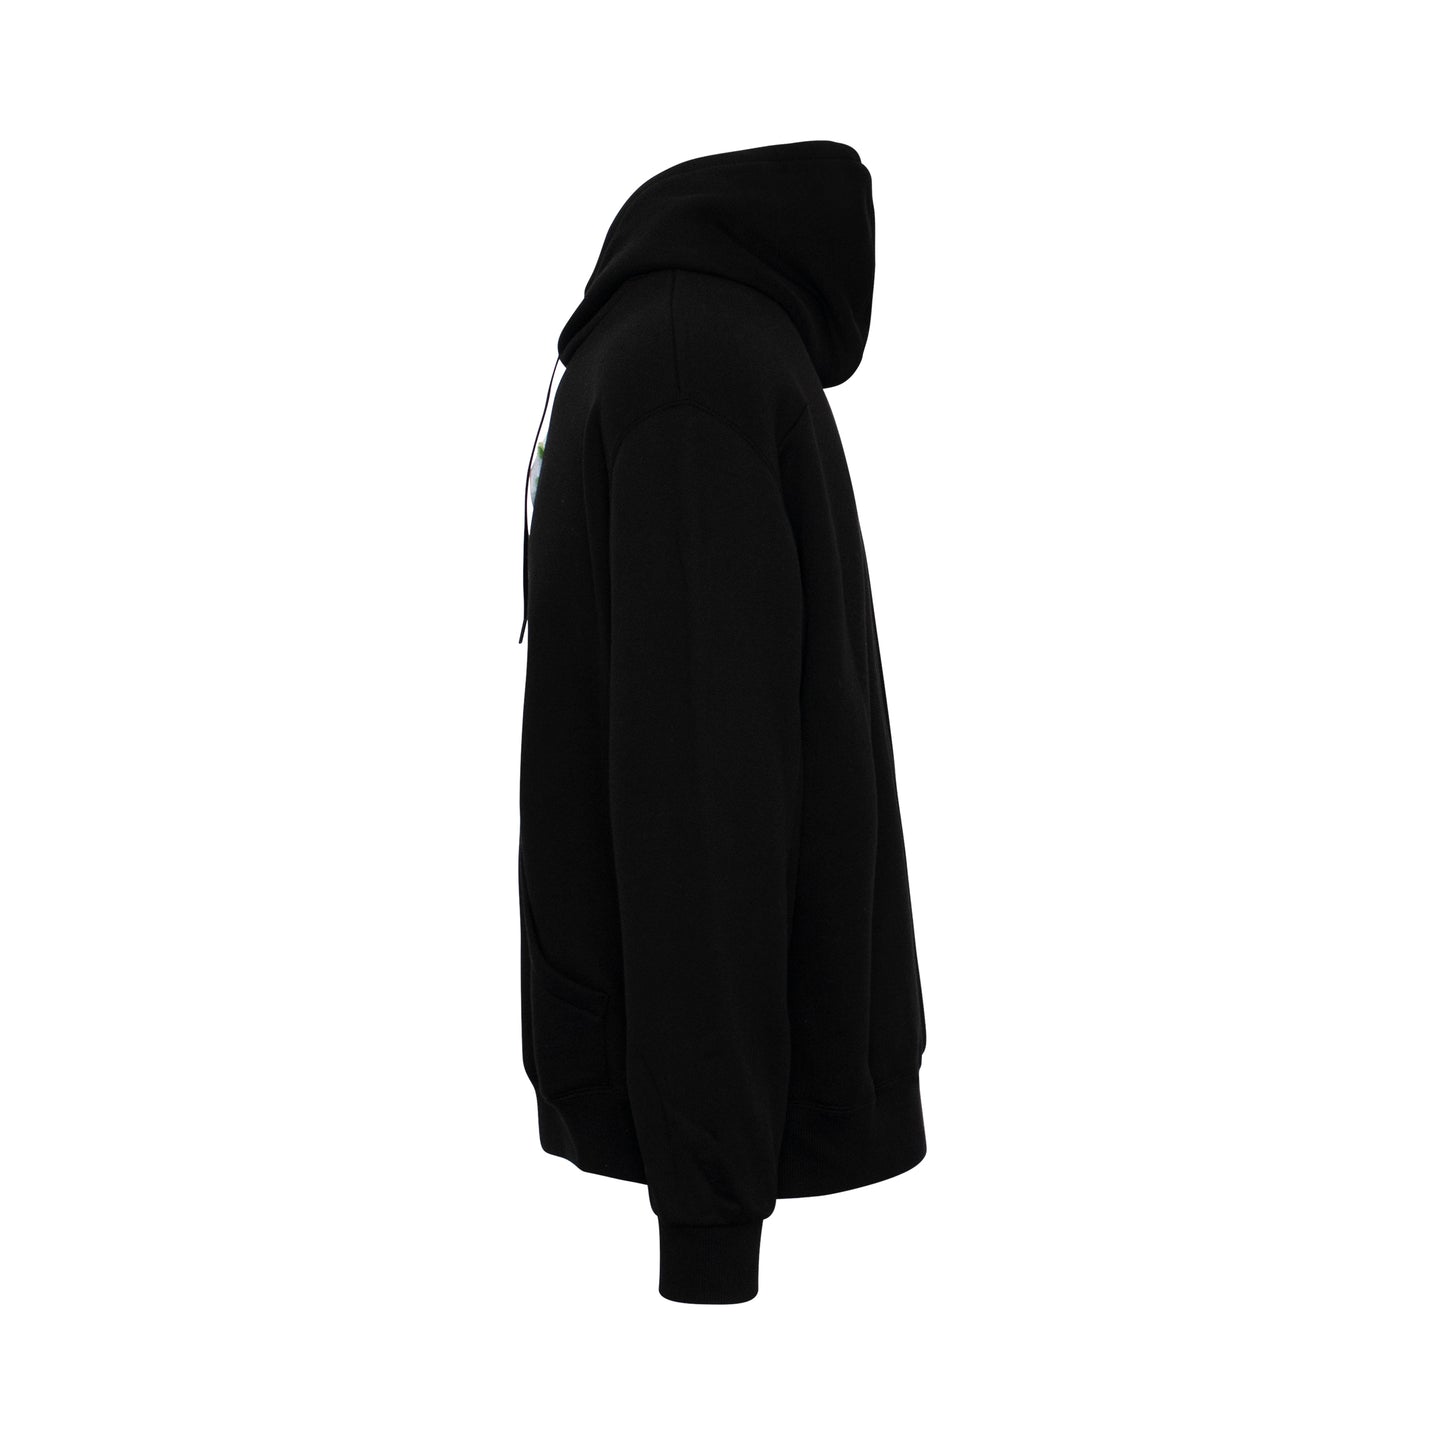 Puppet Embroidery Hoodie in Black